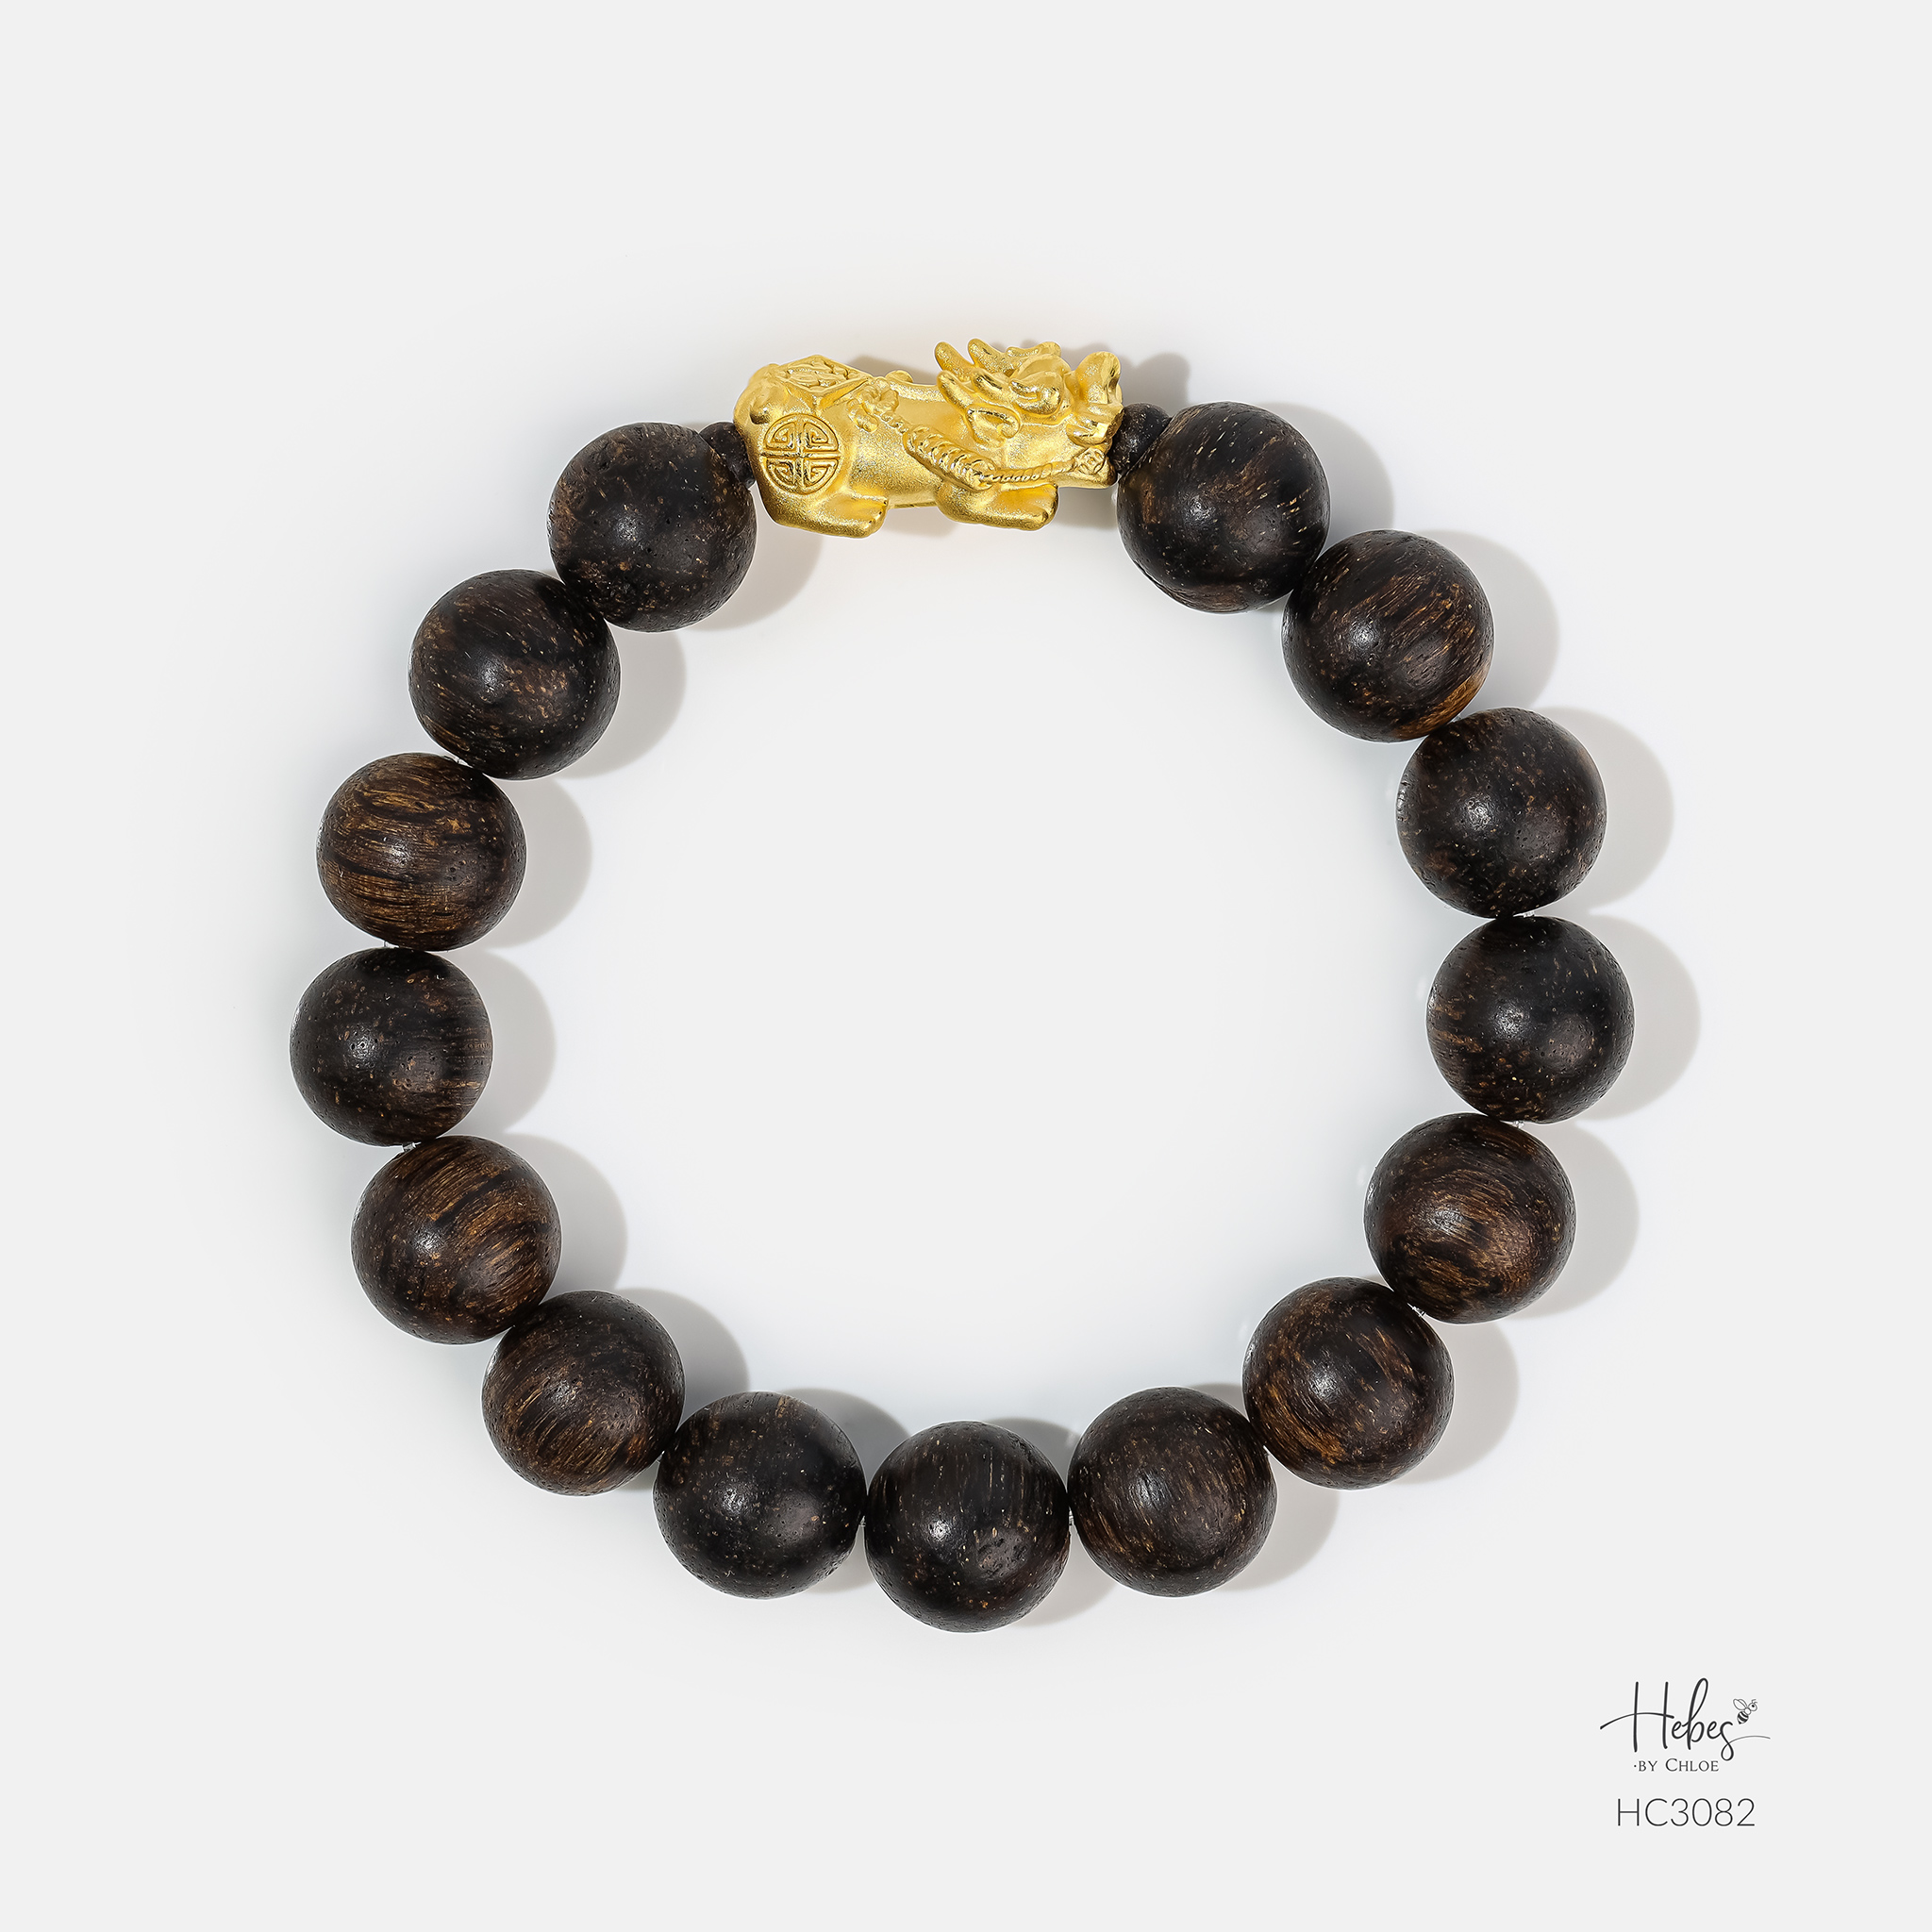 High-end-agarwood-bracelets-combined-with-Pixiu-charm-brings-prosperity-and-auspiciousness. 